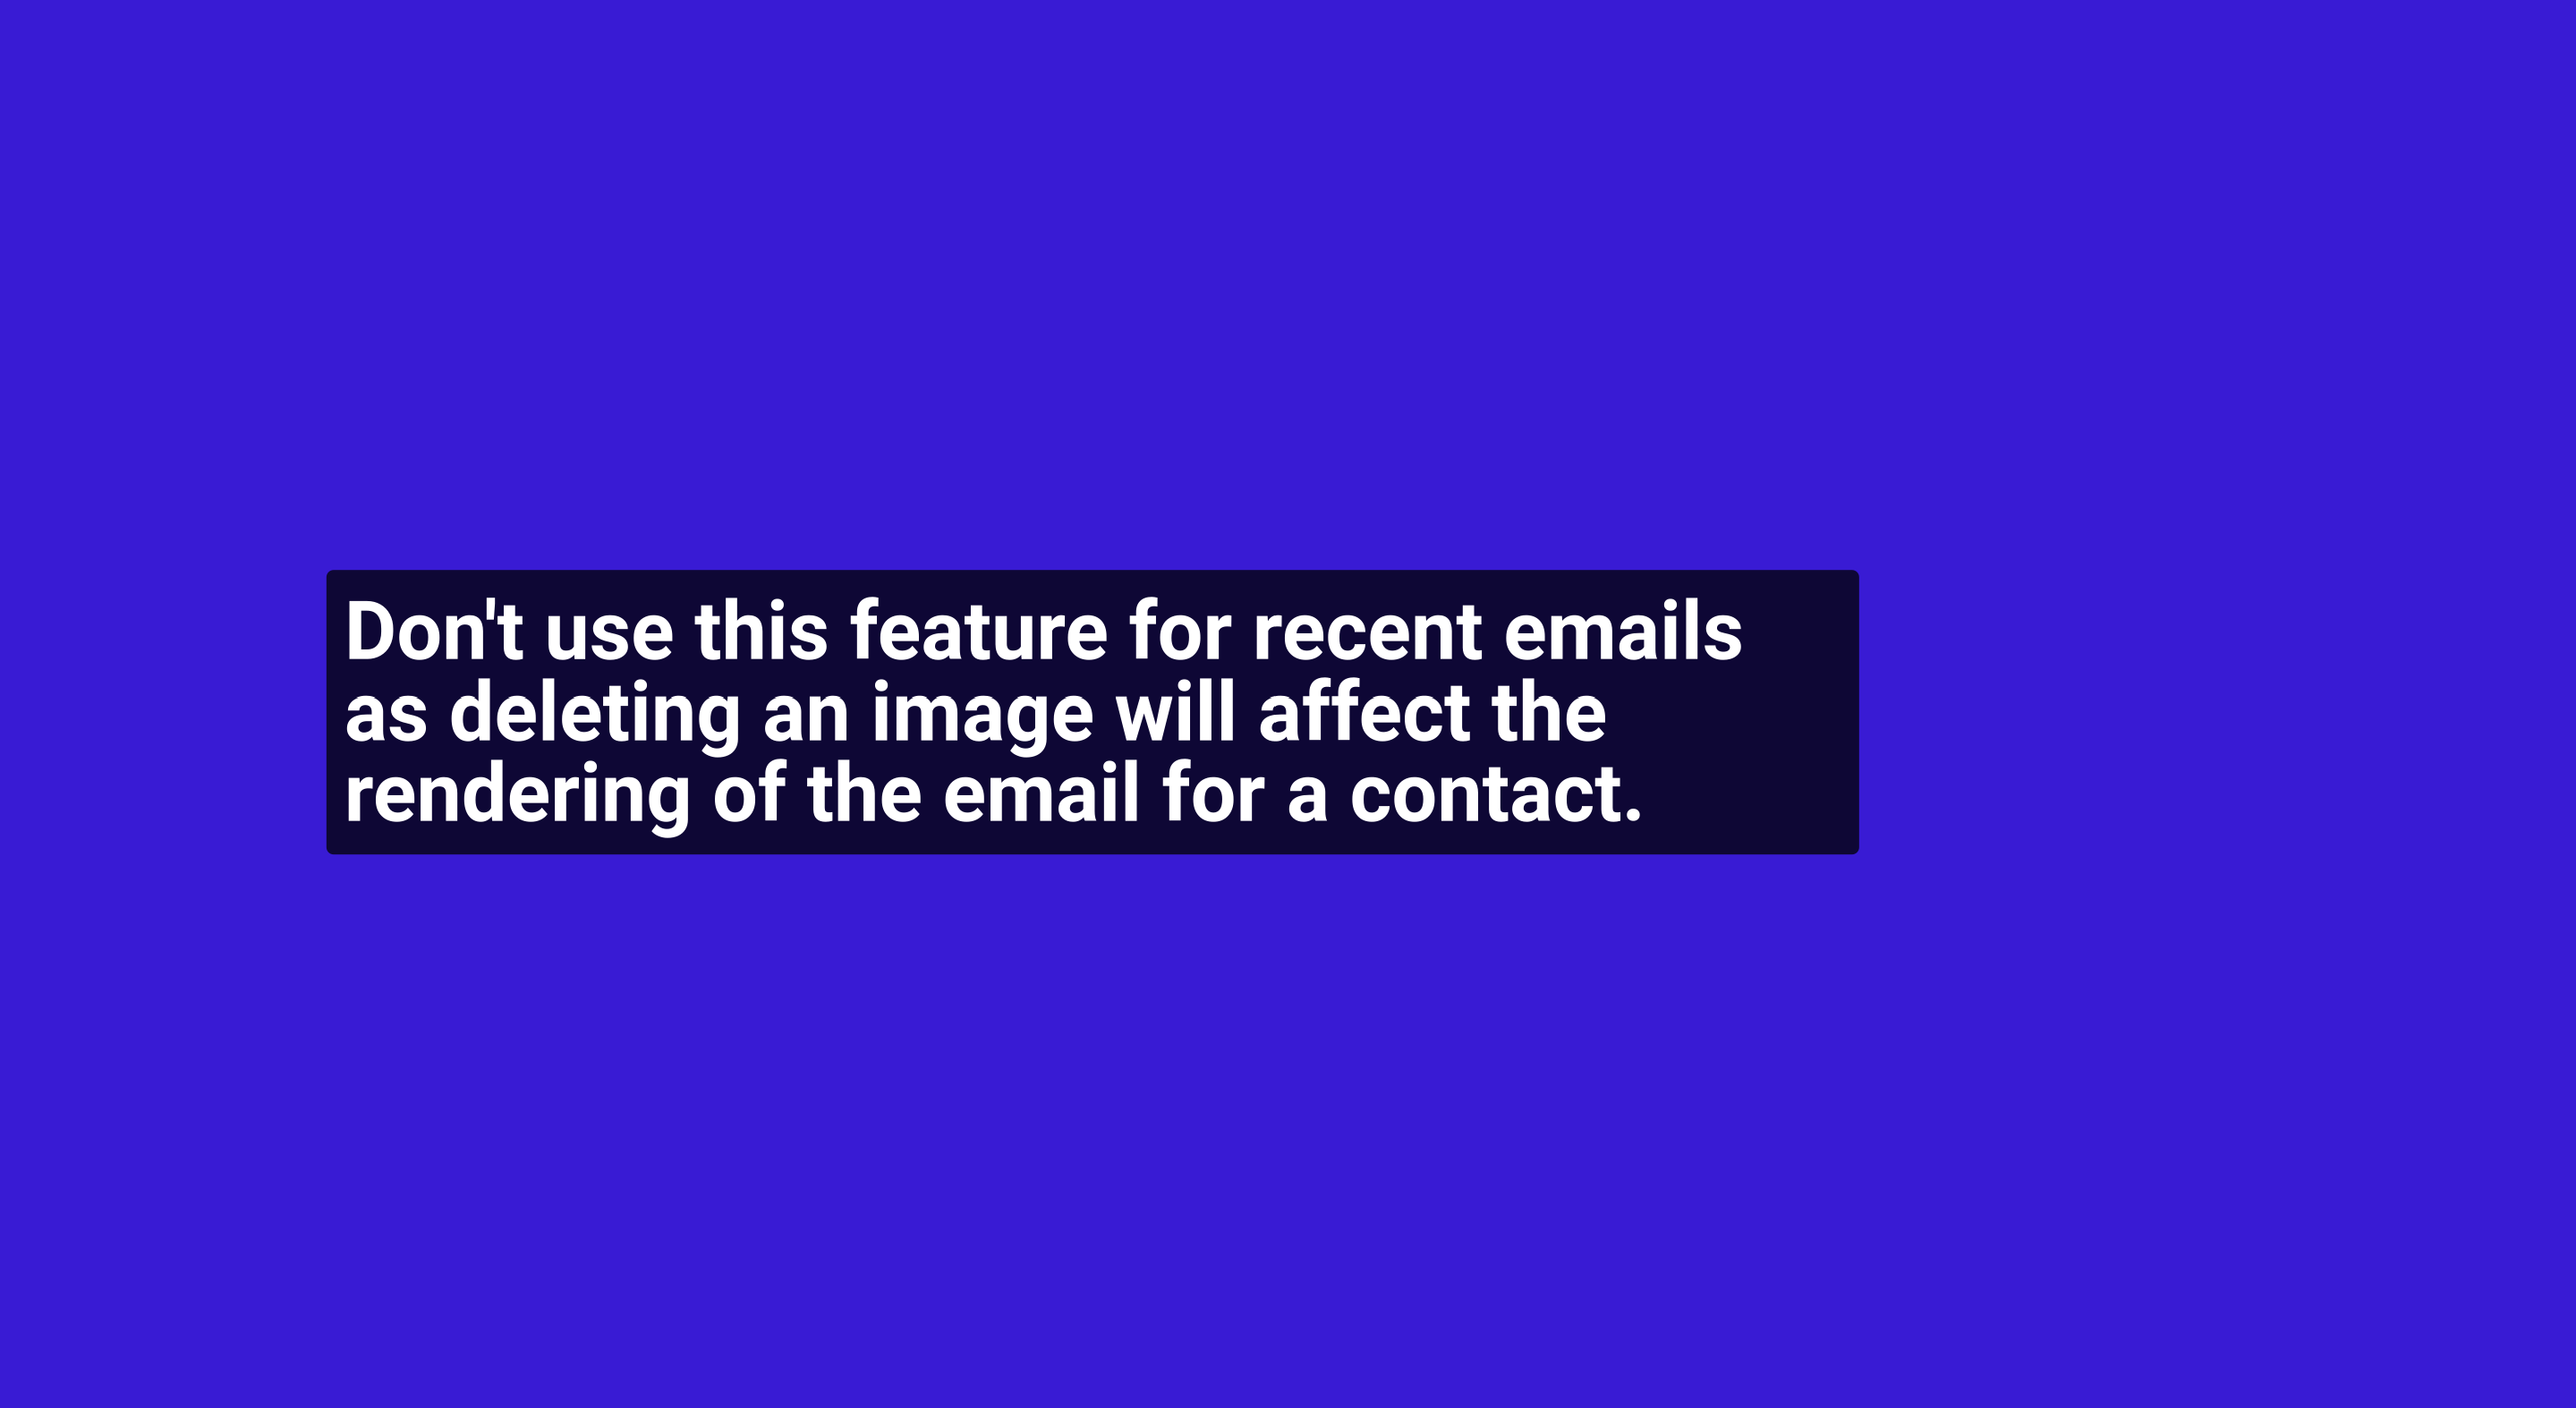 Don't use this feature for recent emails as deleting an image will affect the rendering of the email for a contact.